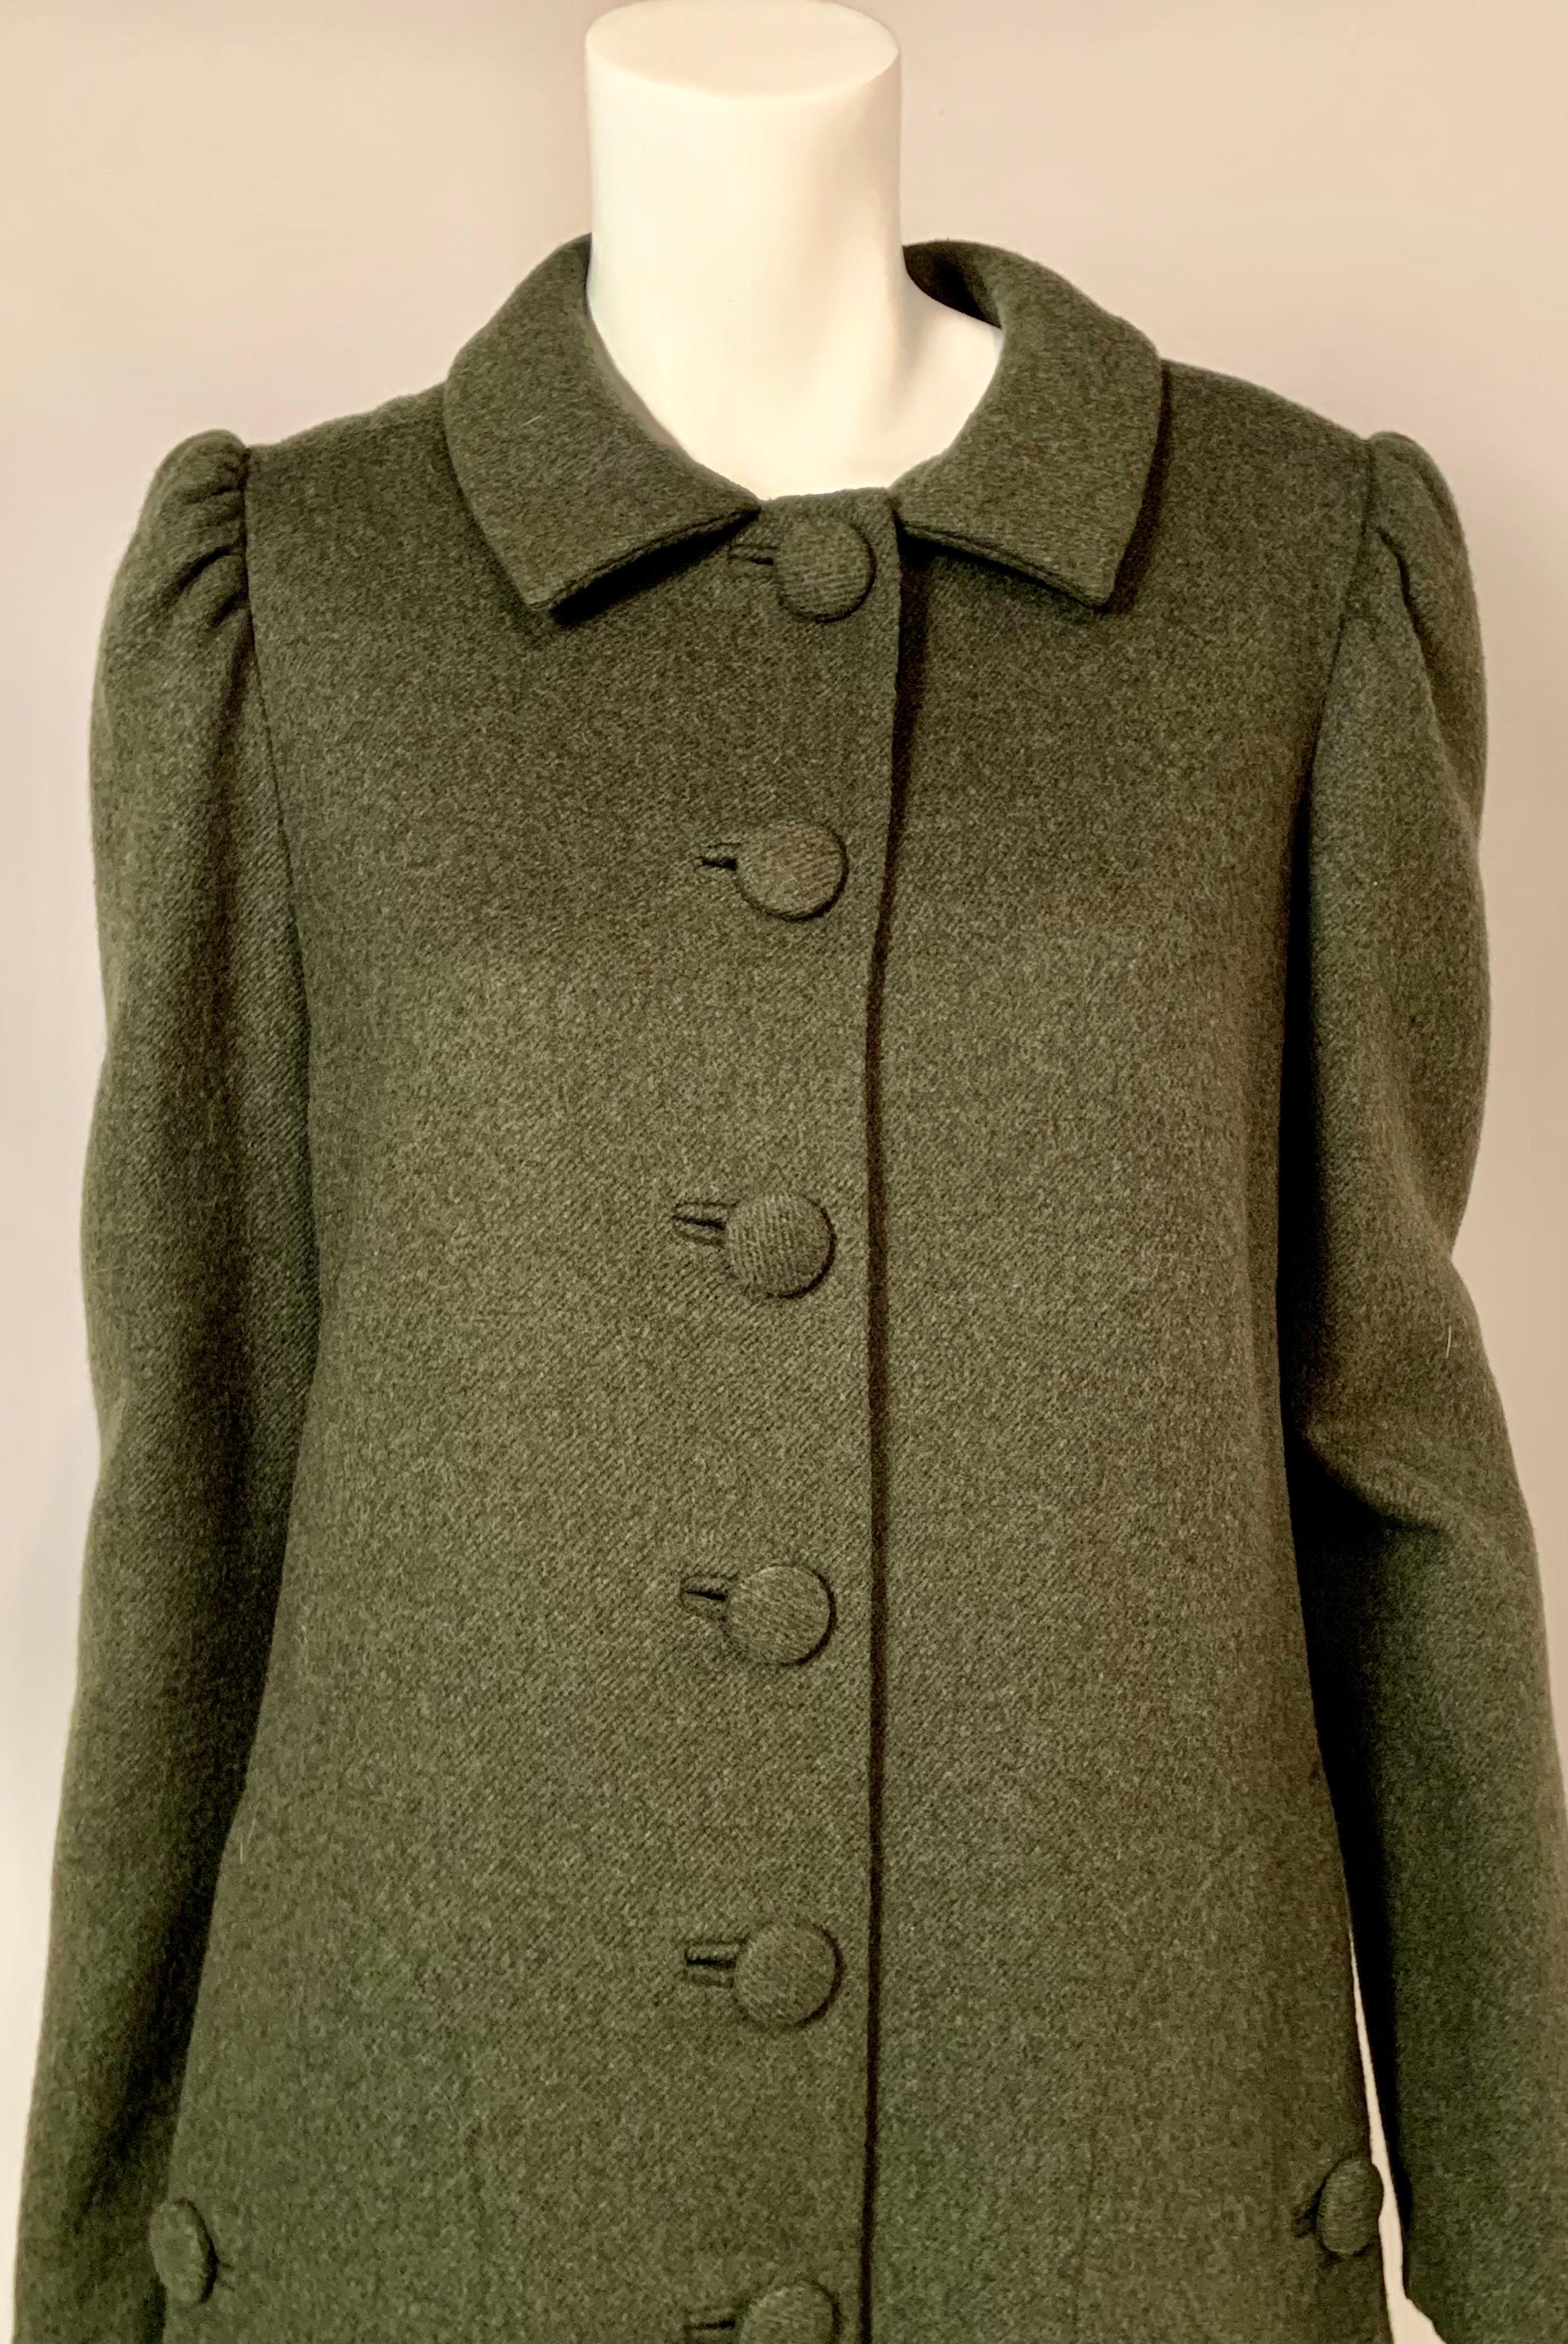 Sybil Connolly is known as the Irish Couturier, and was well known for using Irish made fabrics in her garments.  She is most famous for designing the dress Jackie Kennedy is wearing in her official White House portrait.  
This loden green wool coat